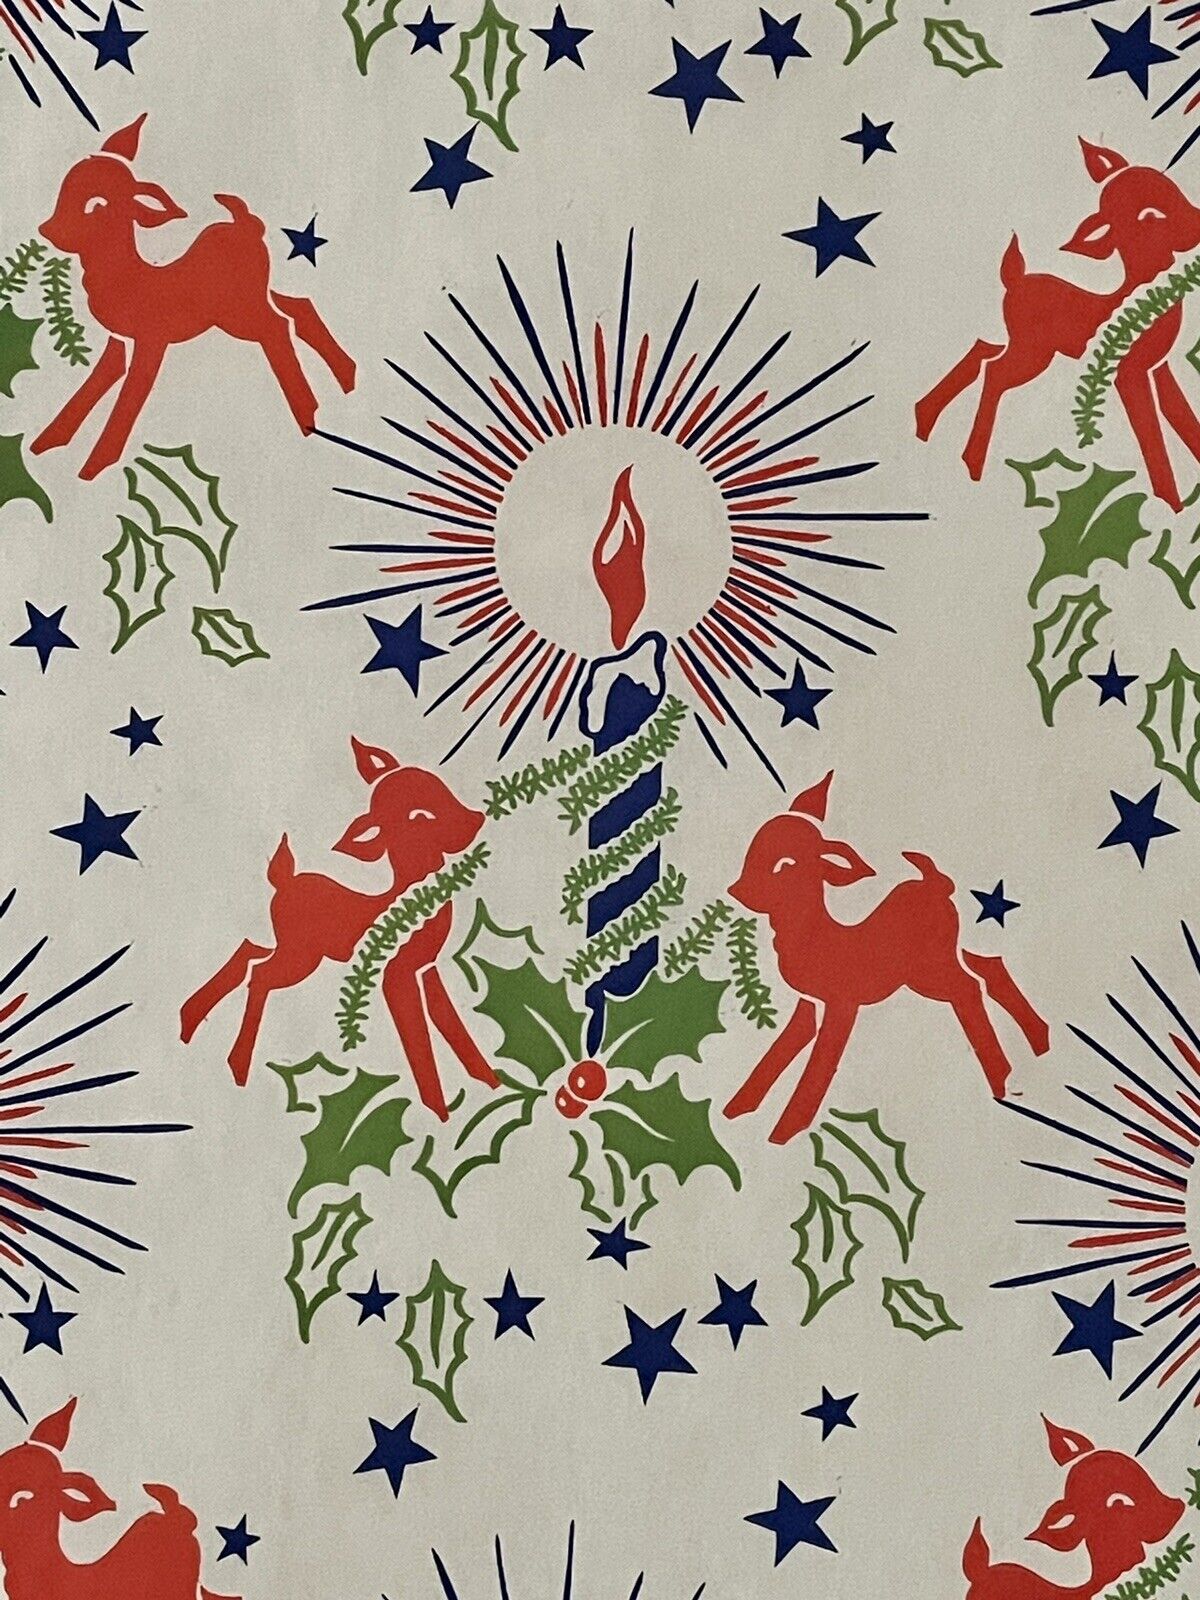 VTG CHRISTMAS WRAPPING PAPER GIFT WRAP  1940s WW2 ERA DEER CANDLE STARS VICTORY